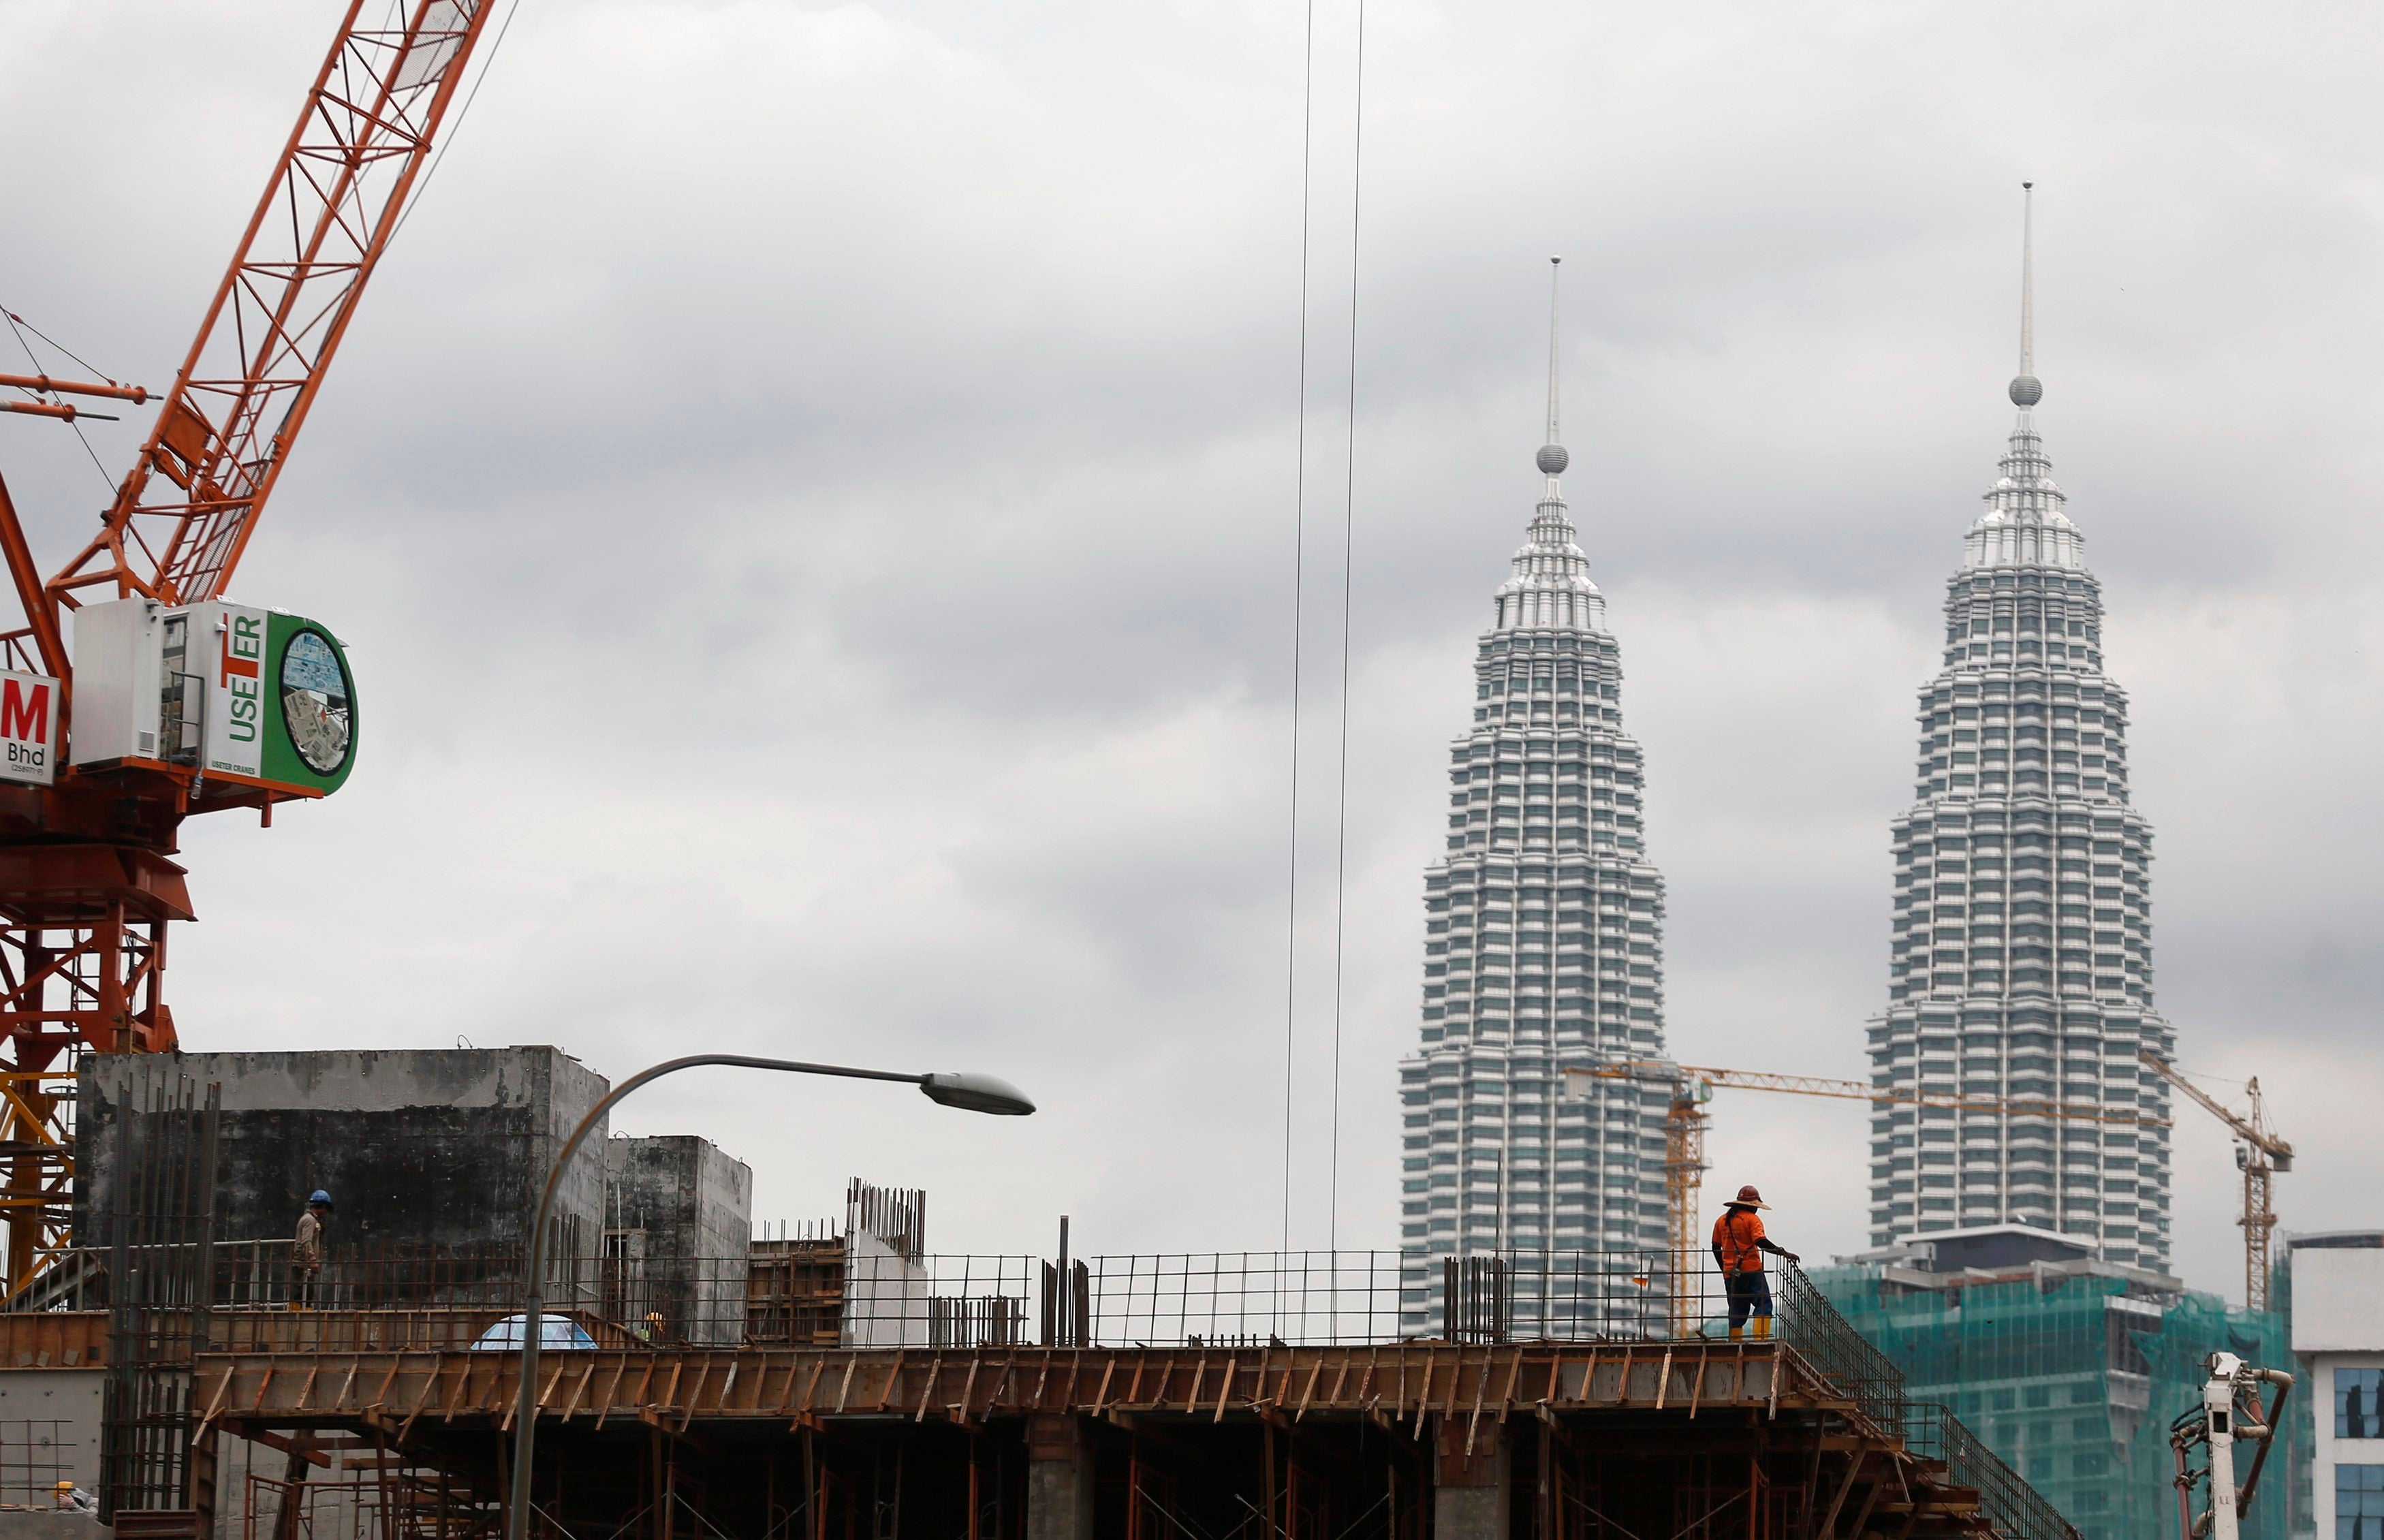 Expert Predicts M'sia's Property Market Crash In 2018, House Prices Will Drop Drastically - World Of Buzz 2